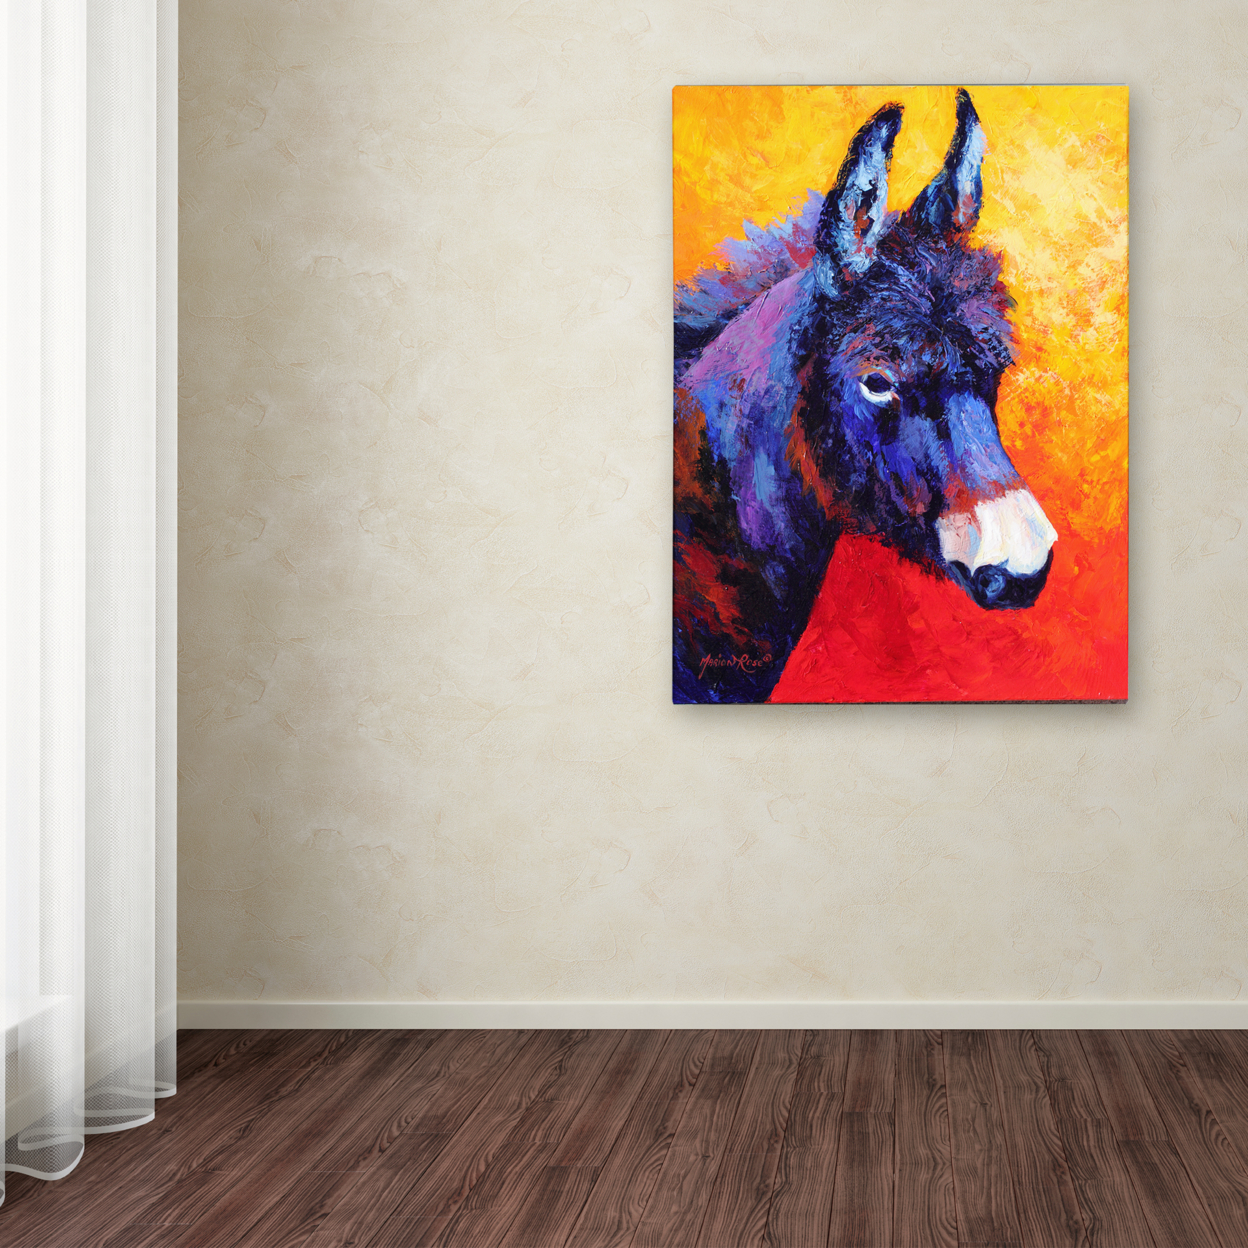 Marion Rose 'Donkey IVX' Ready To Hang Canvas Art 24 X 32 Inches Made In USA